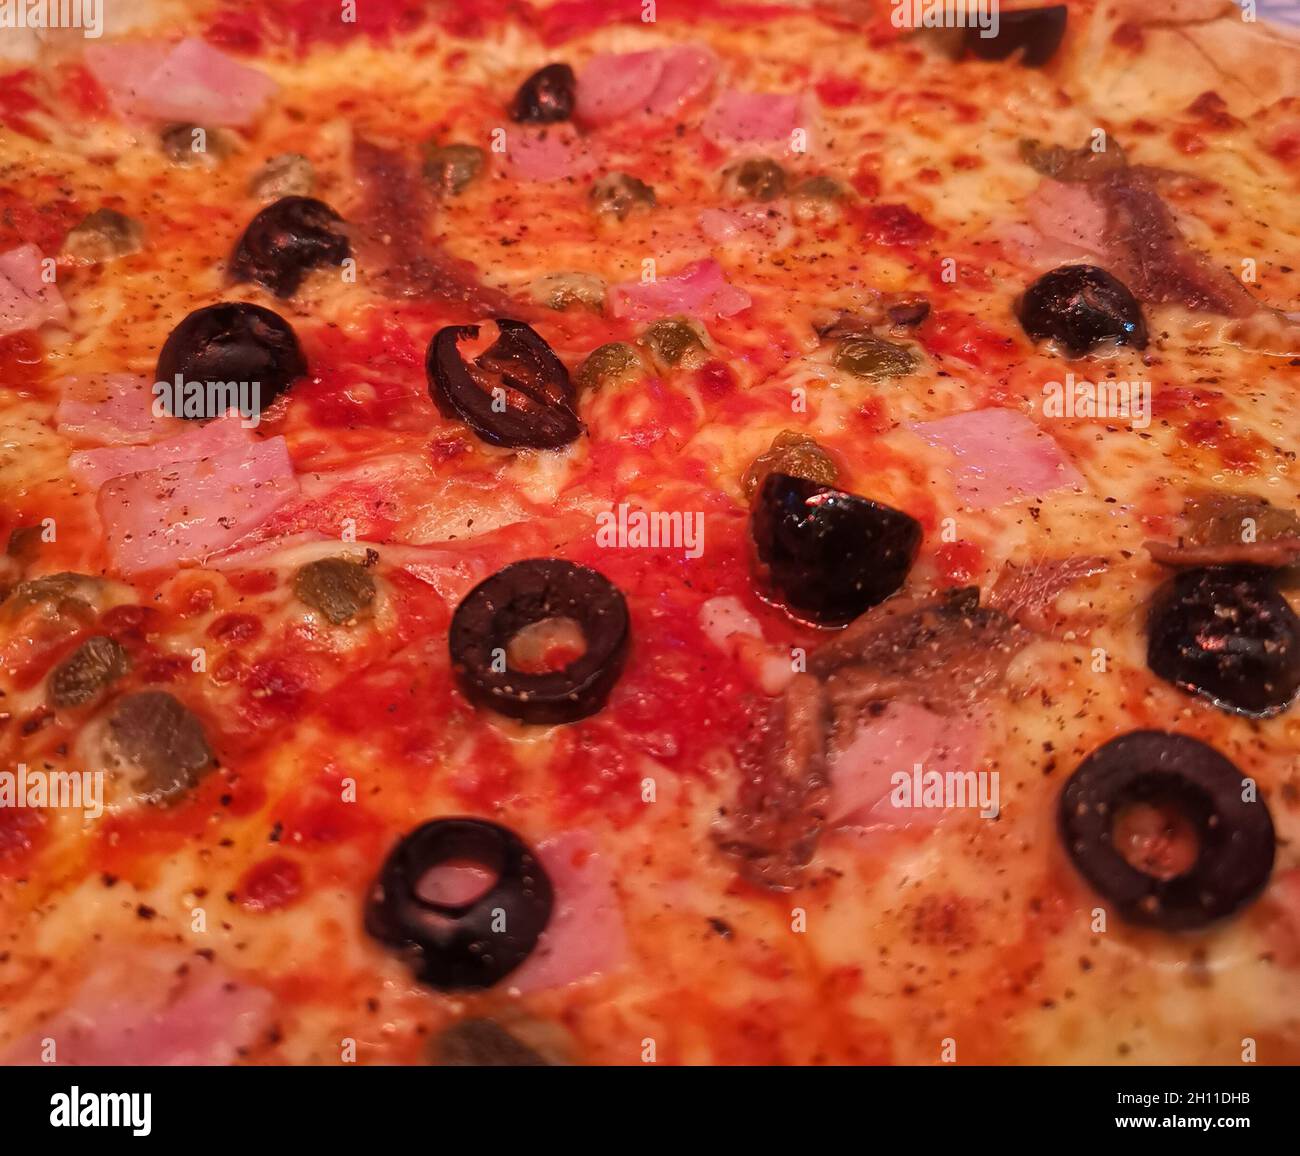 Full frame image of pizza with black olives and tomato Stock Photo